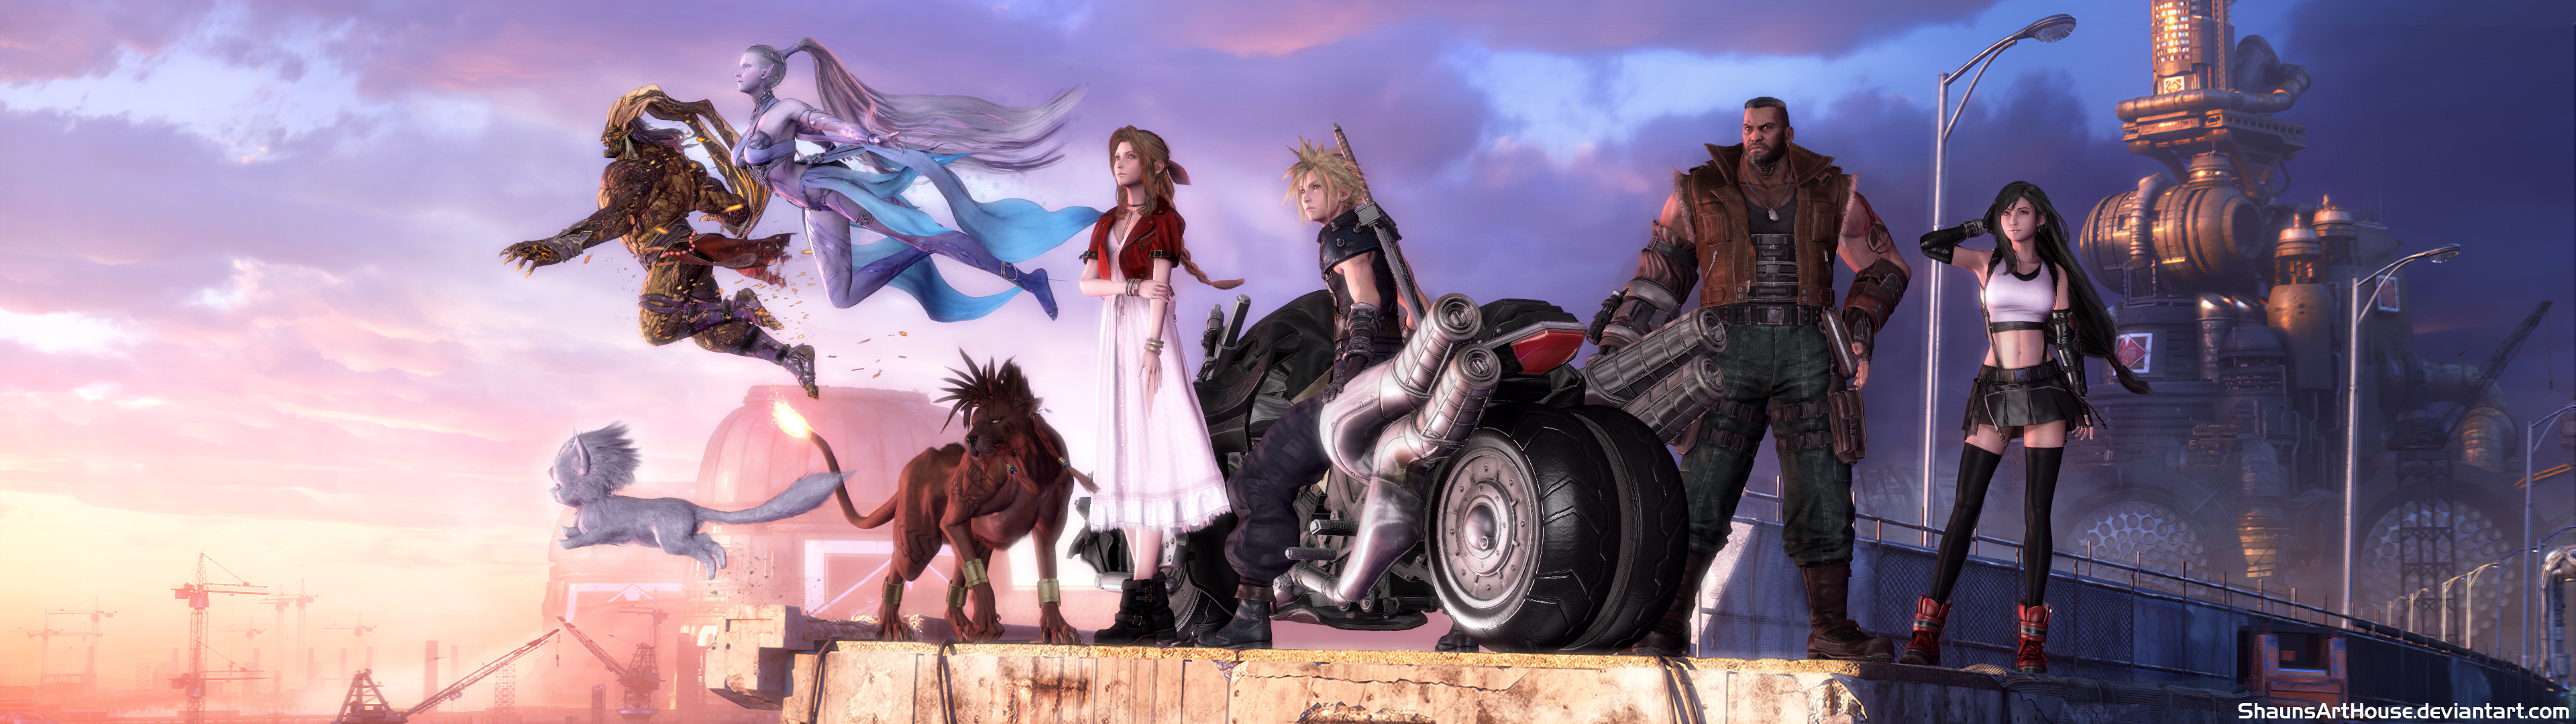 Final Fantasy Remake Dual Screen Wallpaper By Shaunsarthouse On